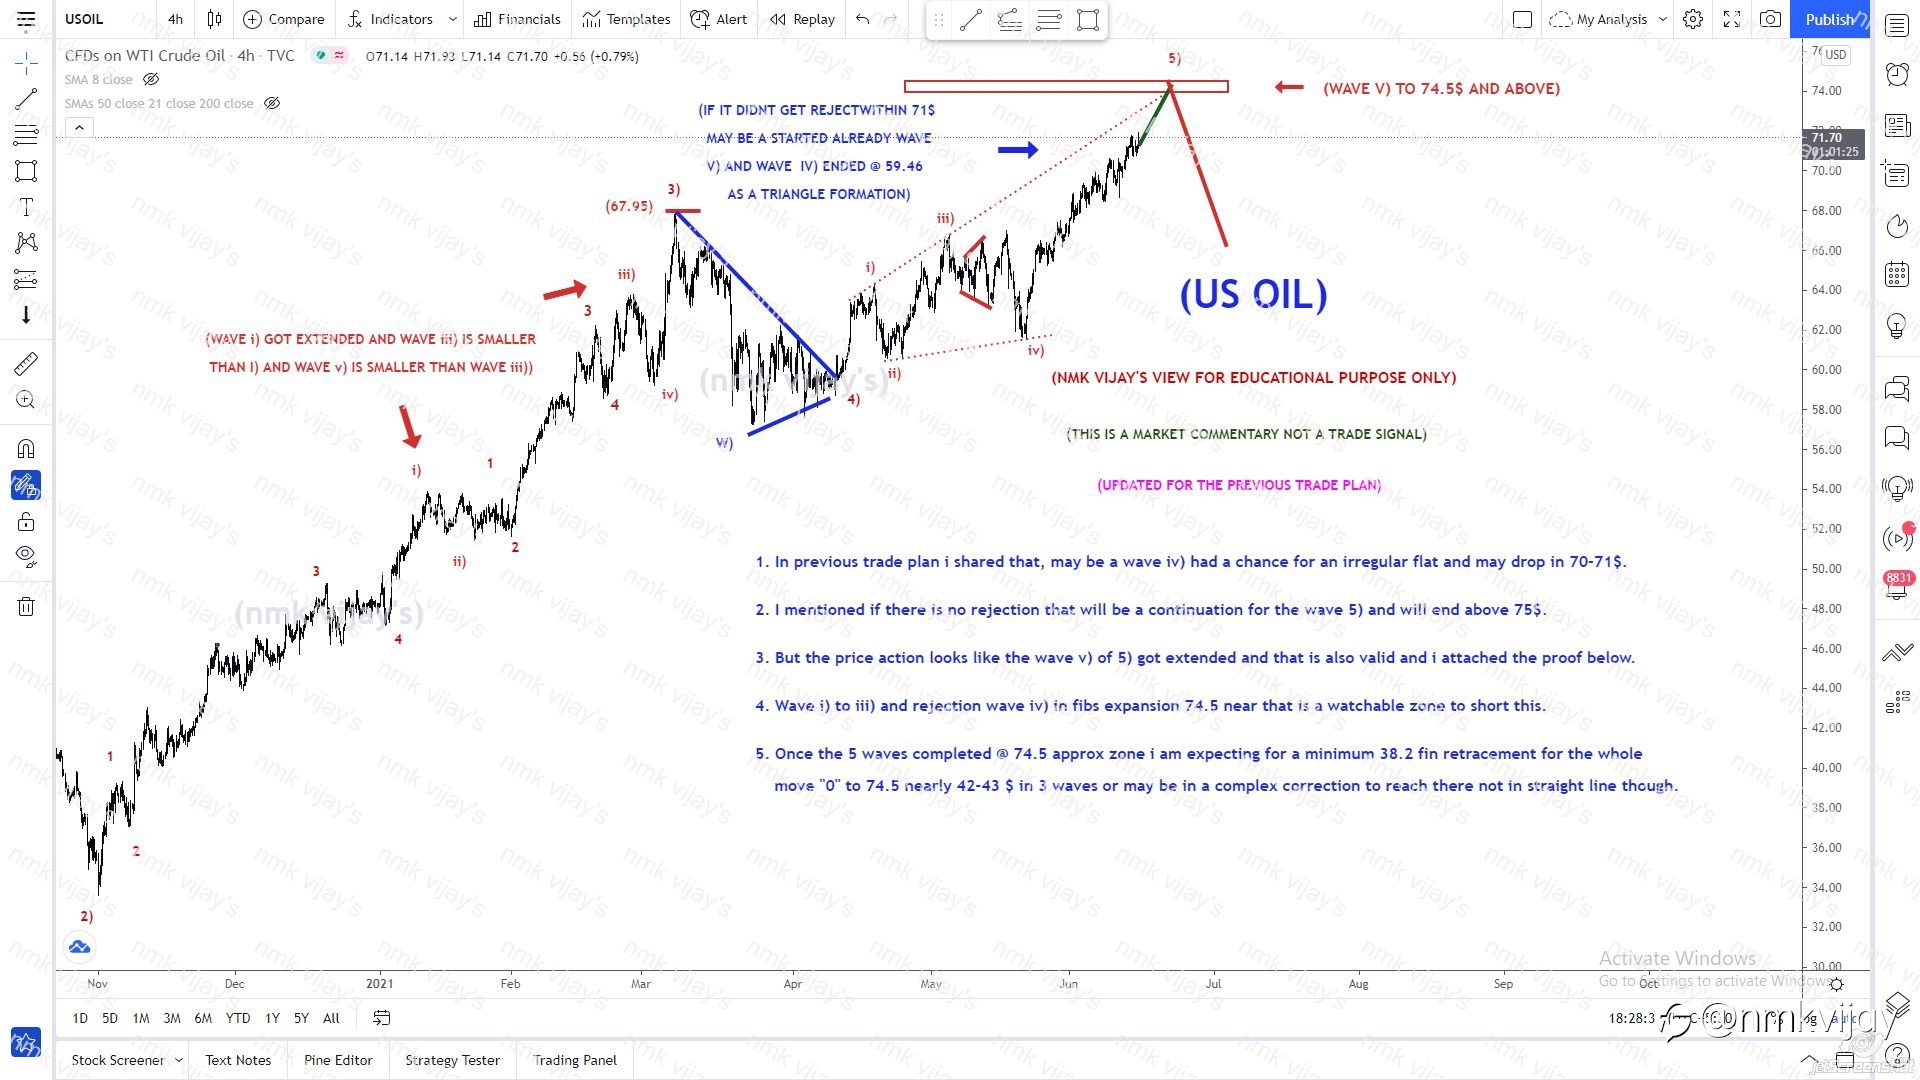 USOIL-Wave v) of 5) is an expanding ending diagonal to 74.5 ?